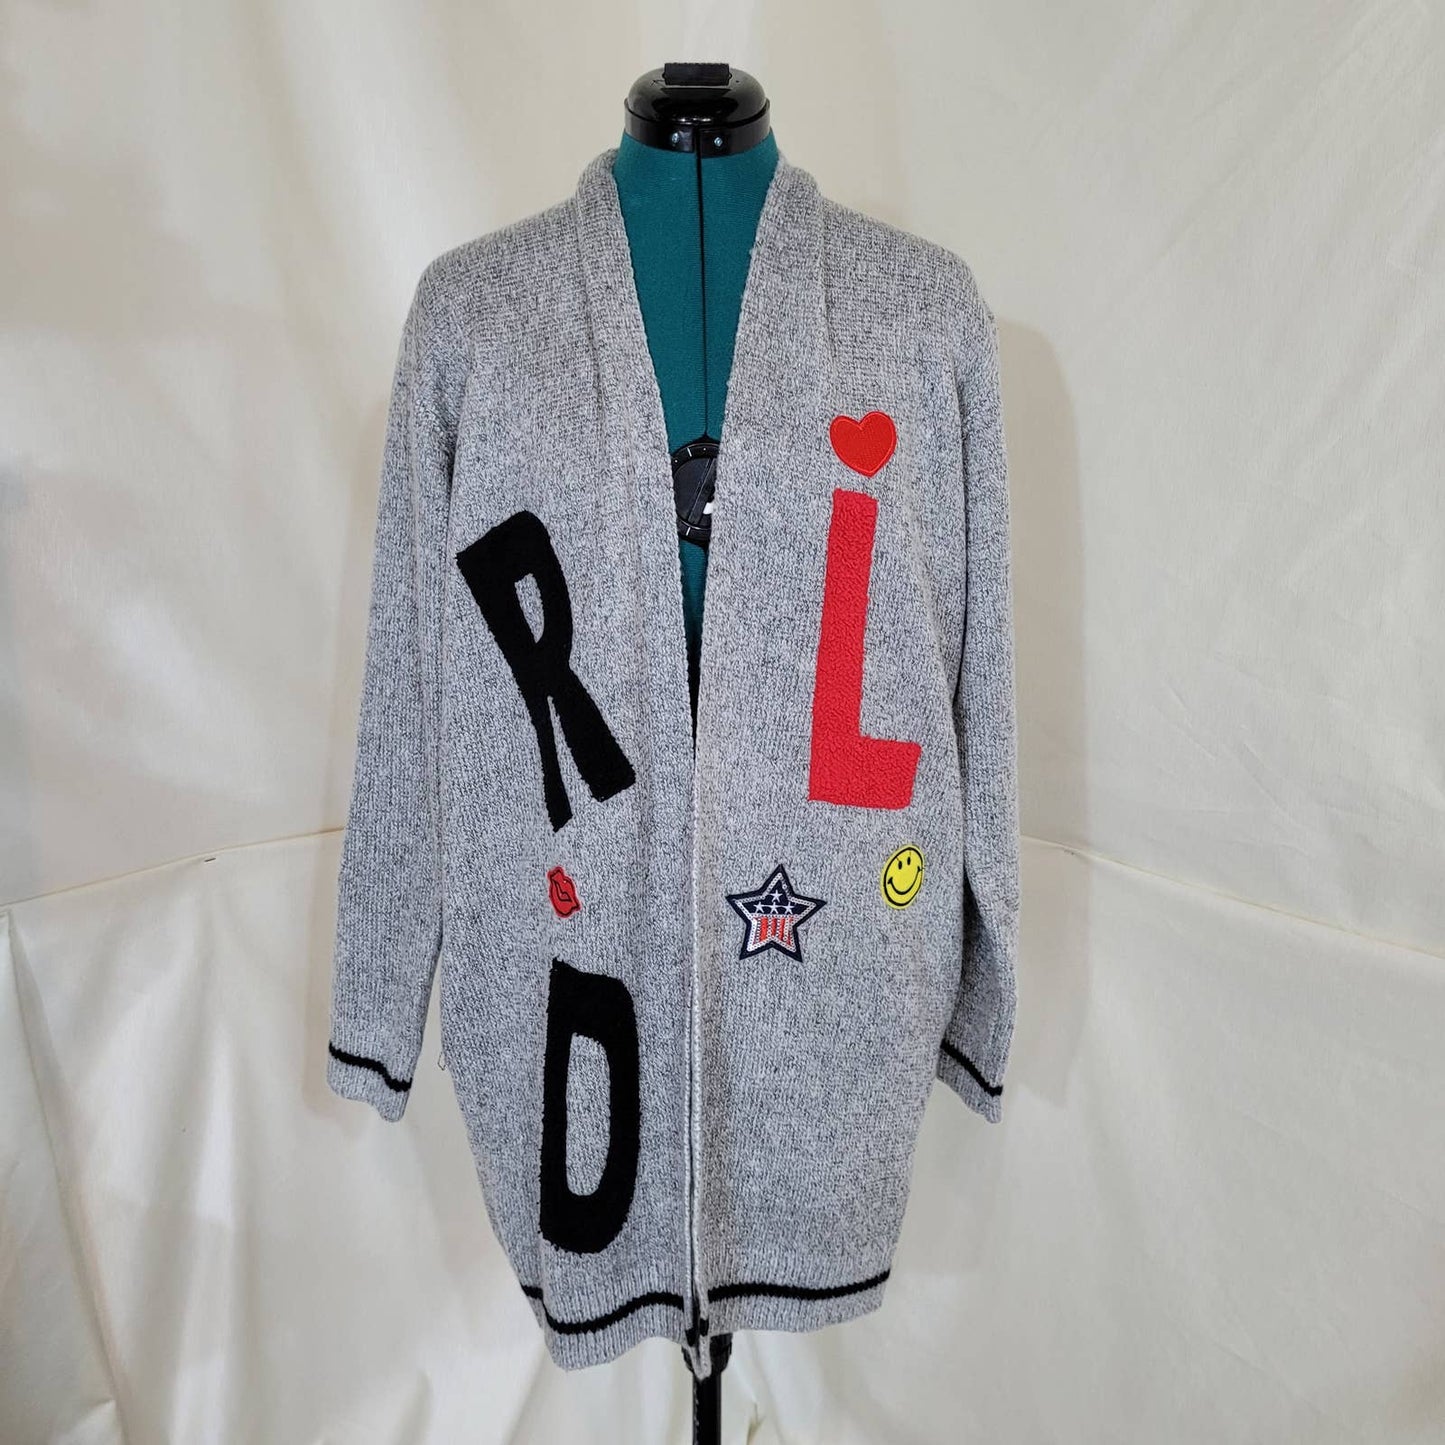 Dreamers Gray Knit Varsity Style Cardigan with Patches - Size Medium / Large